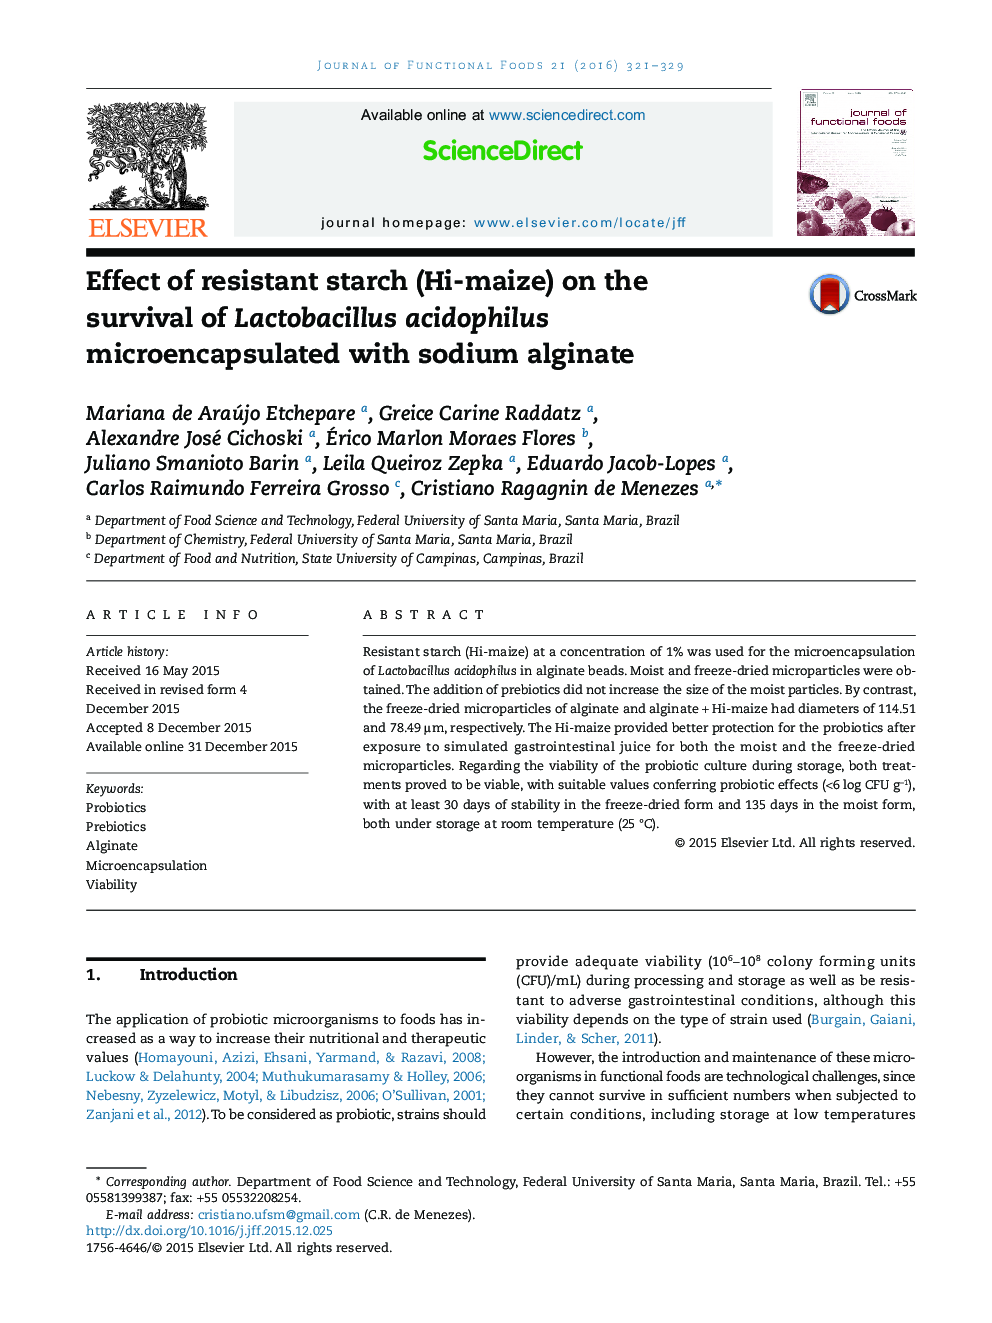 Effect of resistant starch (Hi-maize) on the survival of Lactobacillus acidophilus microencapsulated with sodium alginate